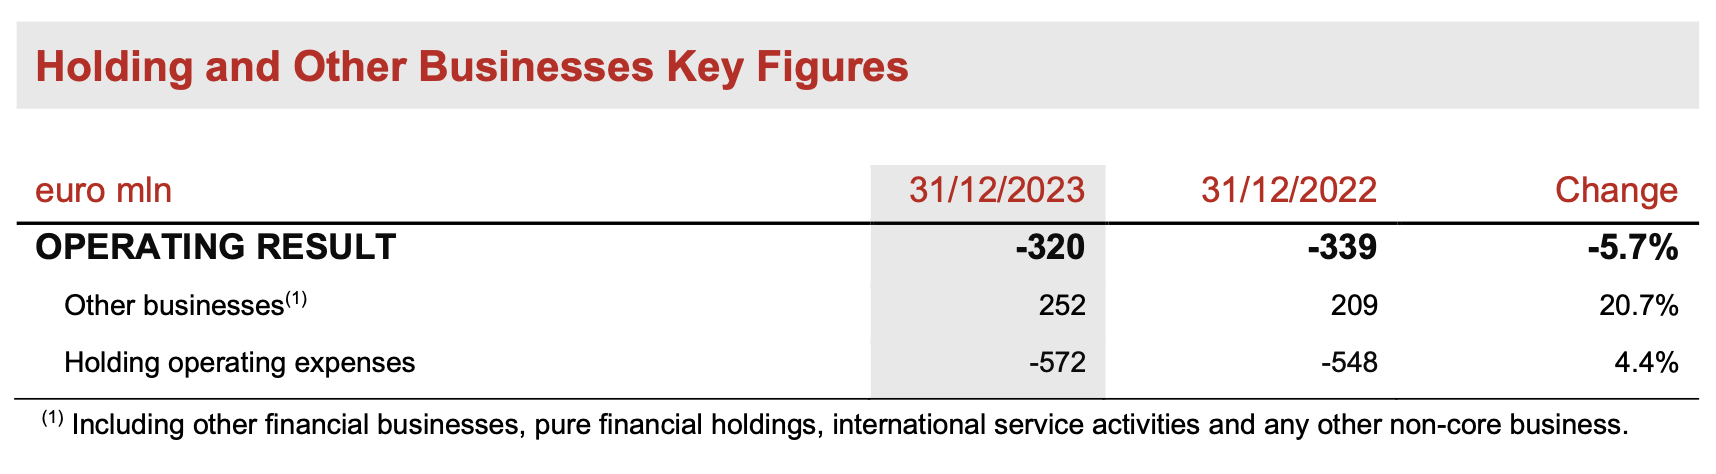 holding-and-other-businesses-key-figures-20240312